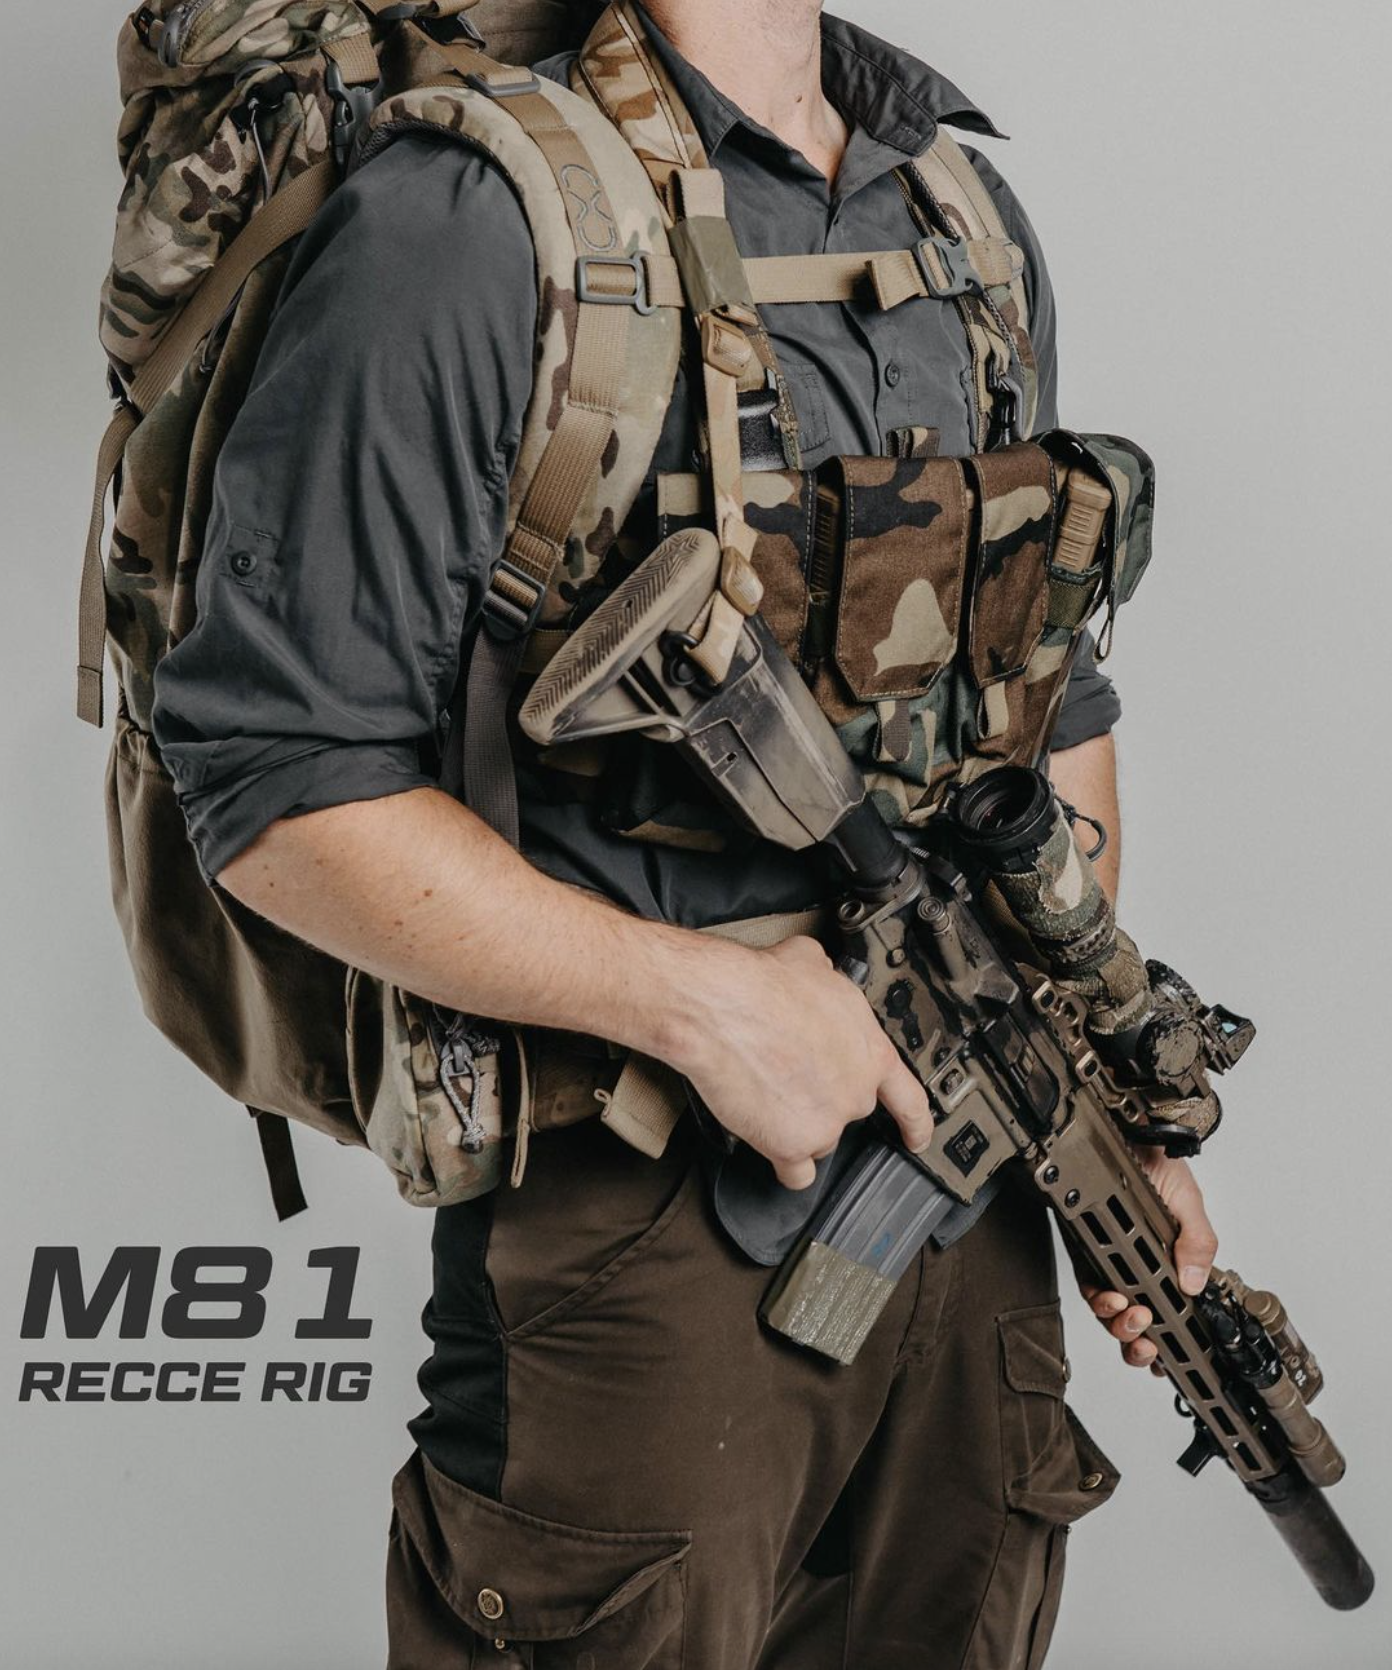 Onward Research RECCE Rig - Product Spotlight | Airsoft MilSim News